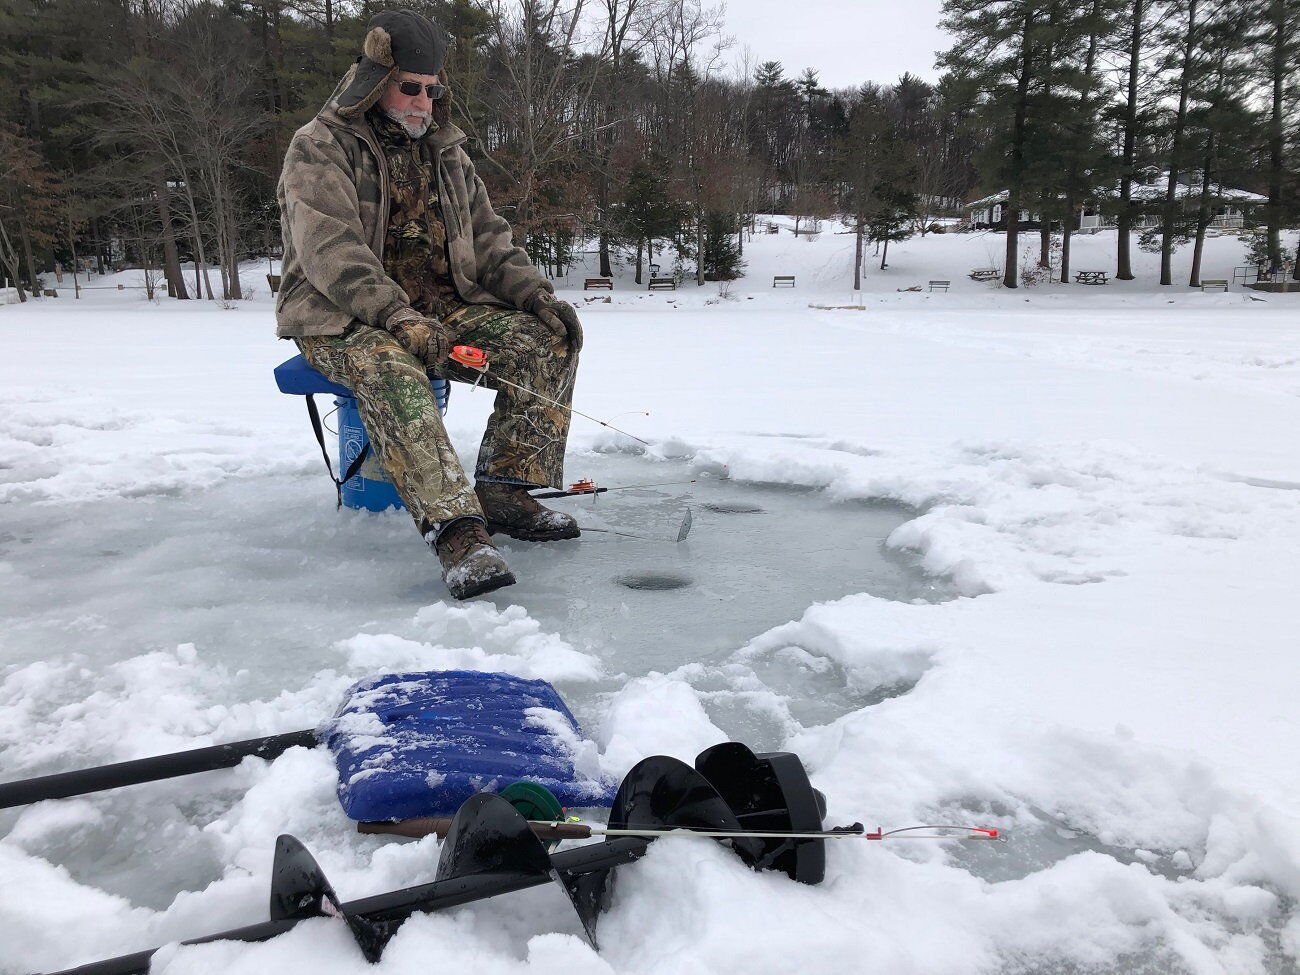 Ice fishing gear for far and near, Wildlife